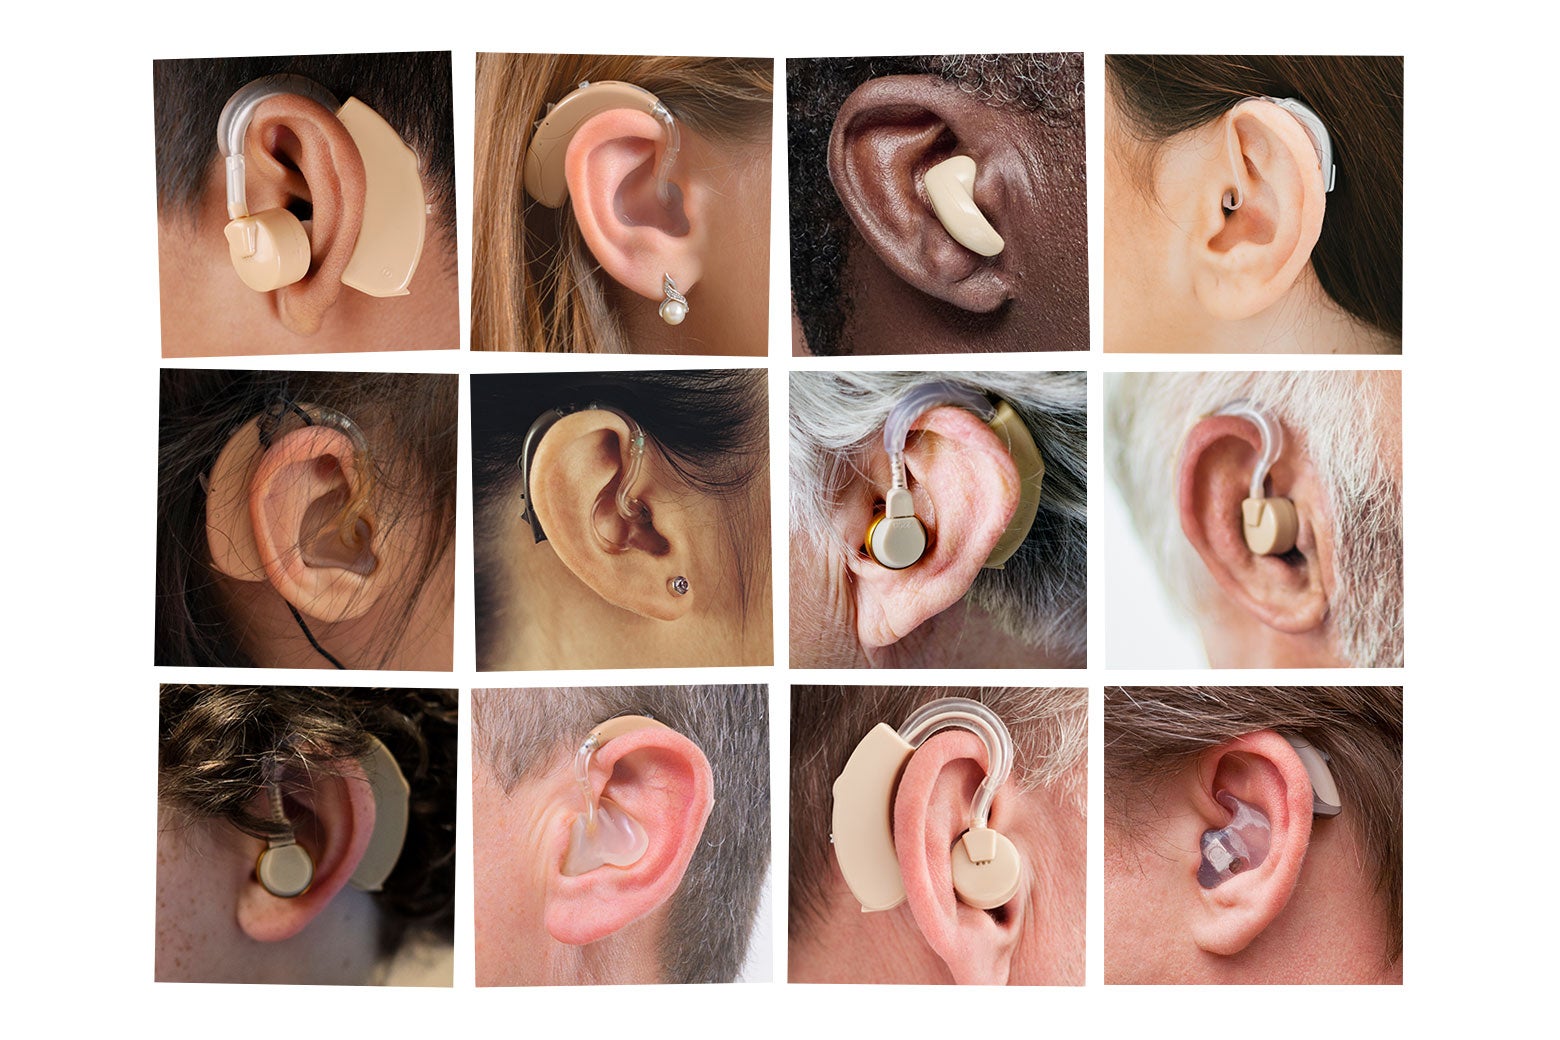 A collage of ears wearing hearing aids.